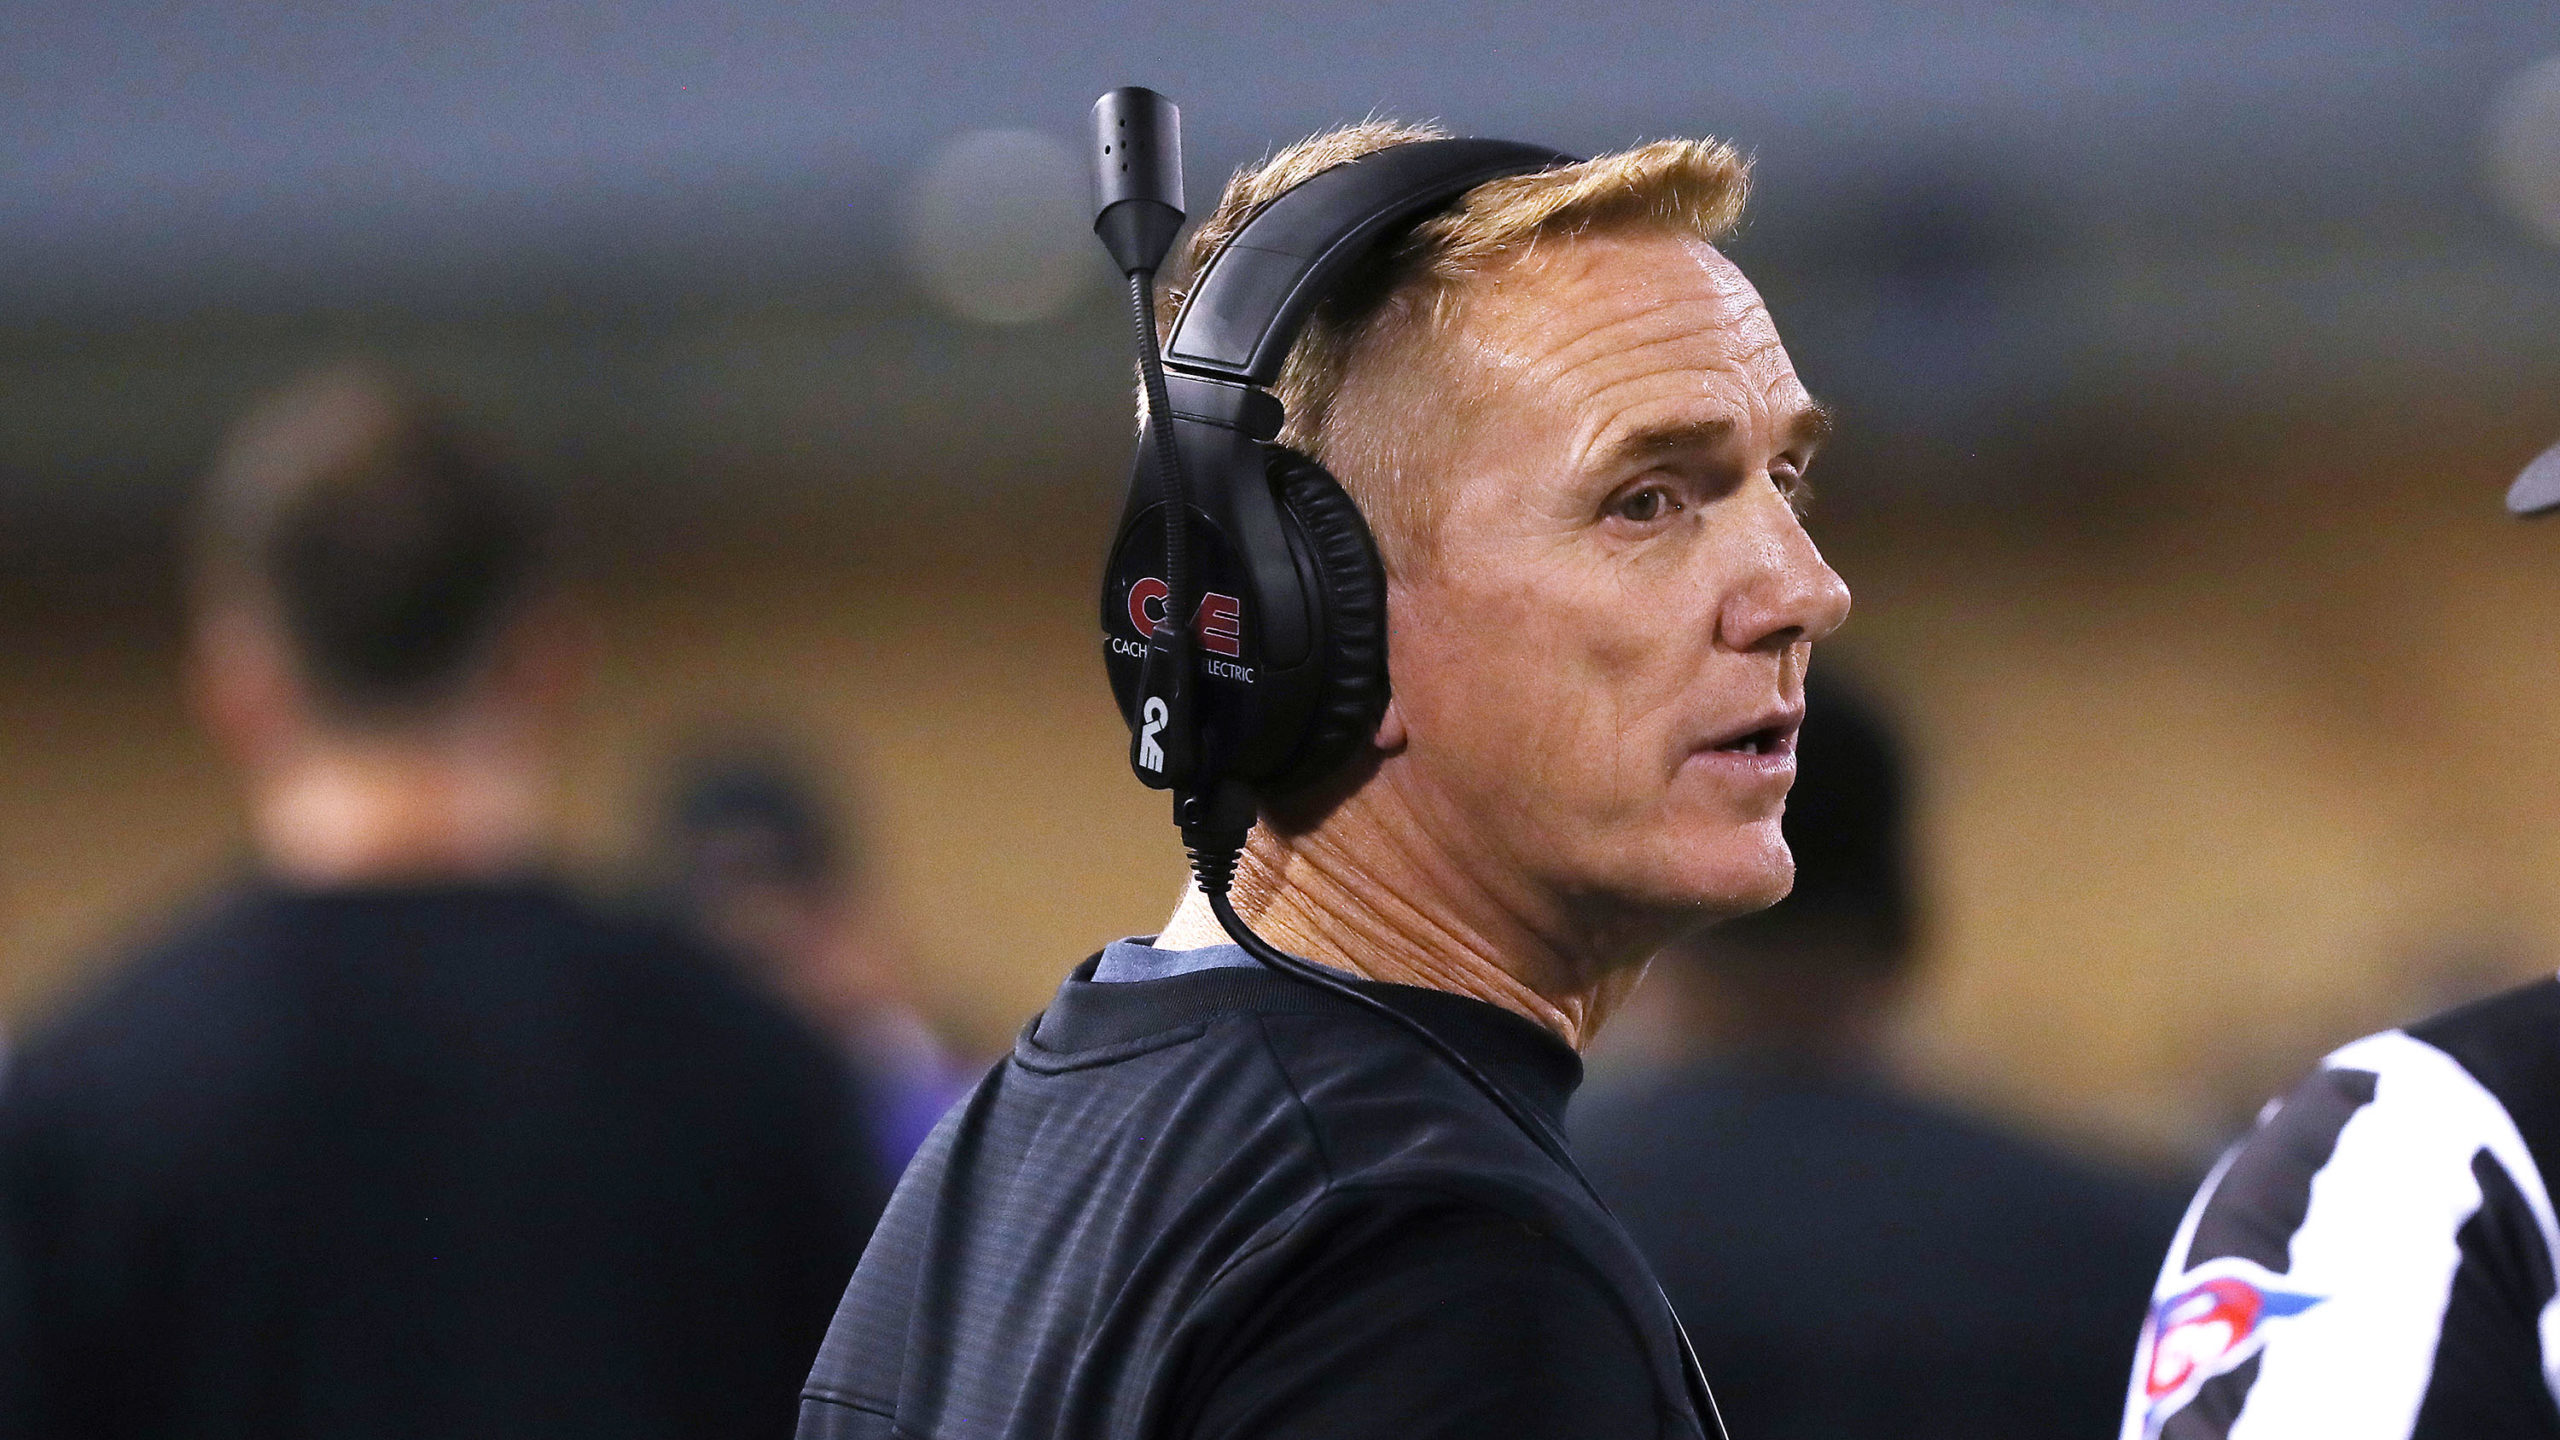 USU coach apologizes for sexual-assault comments